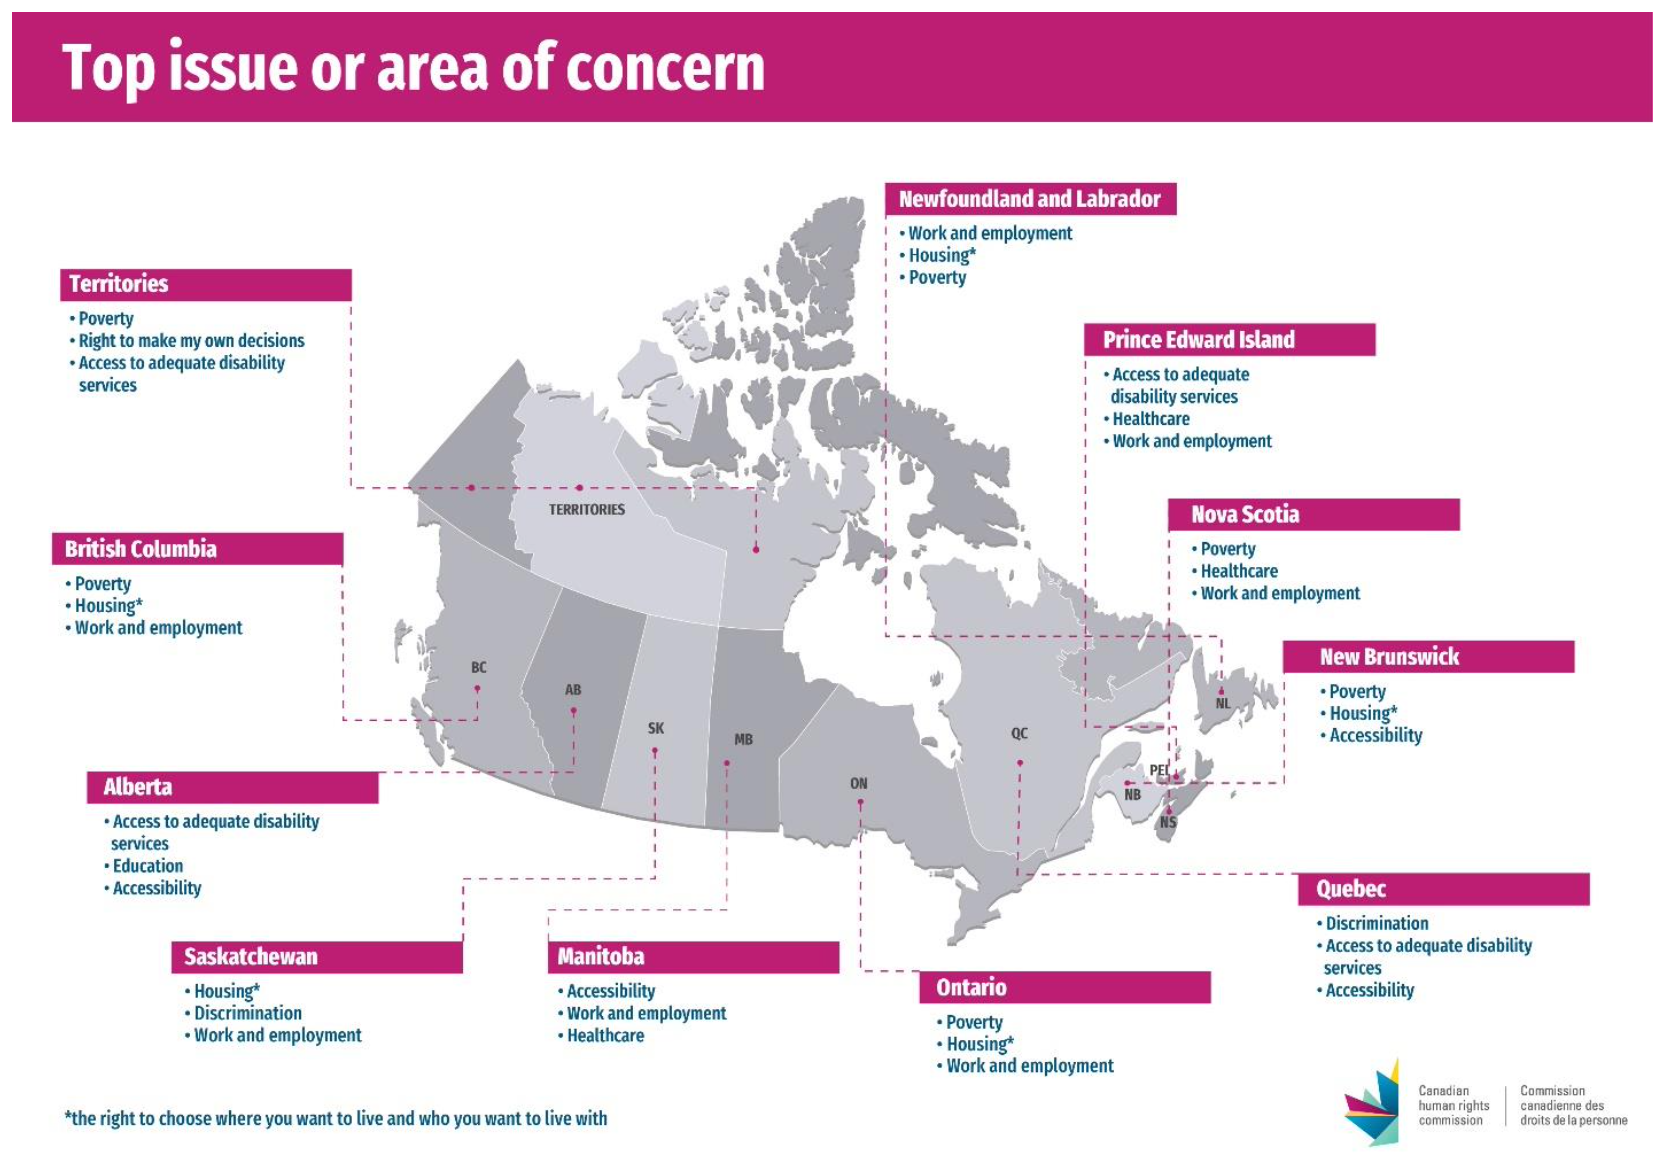 This is a geographical map graphic of Canada with the top areas of concern by region.